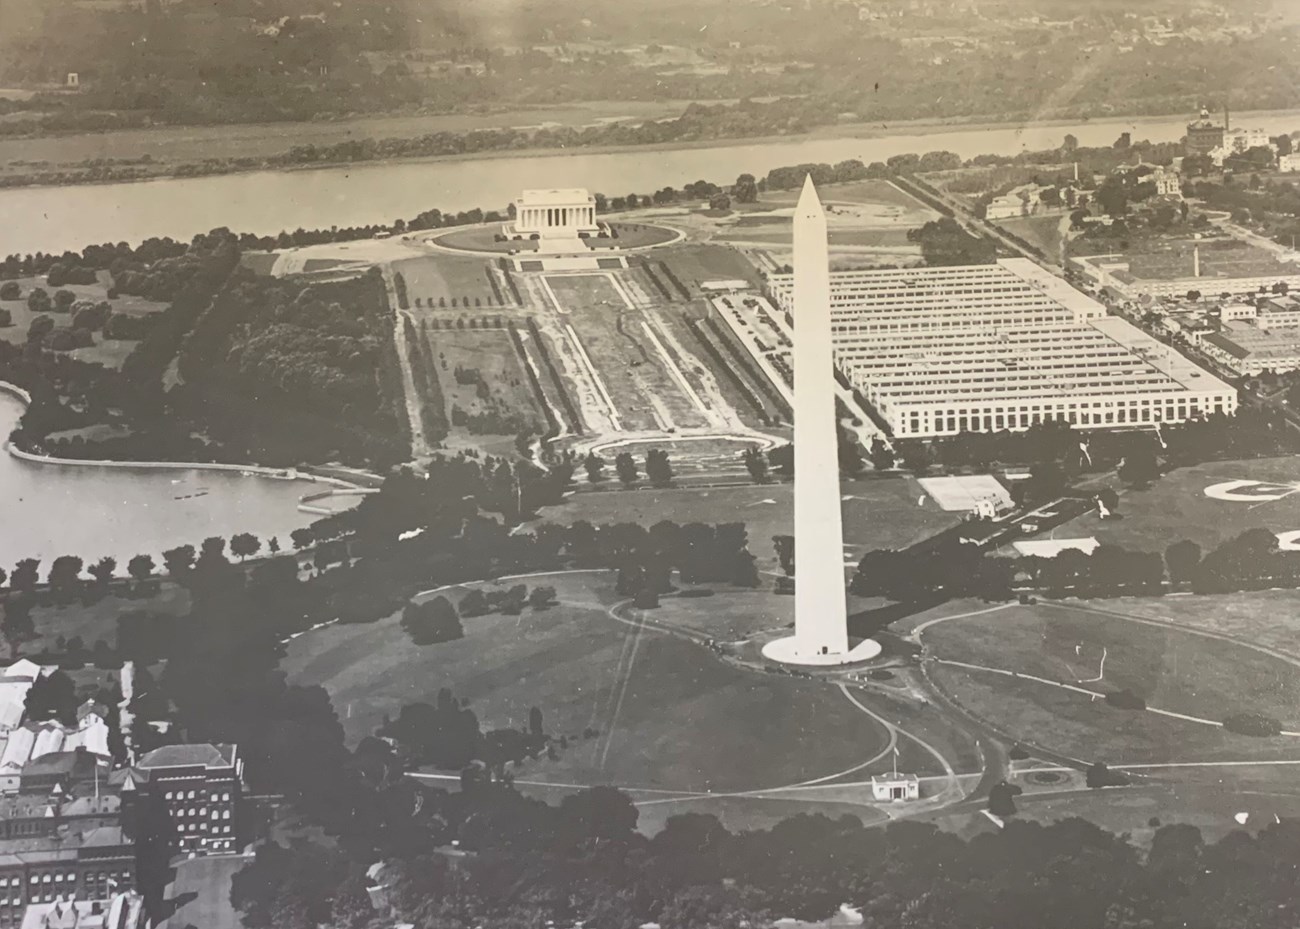 Aerial photograph of the National Mall